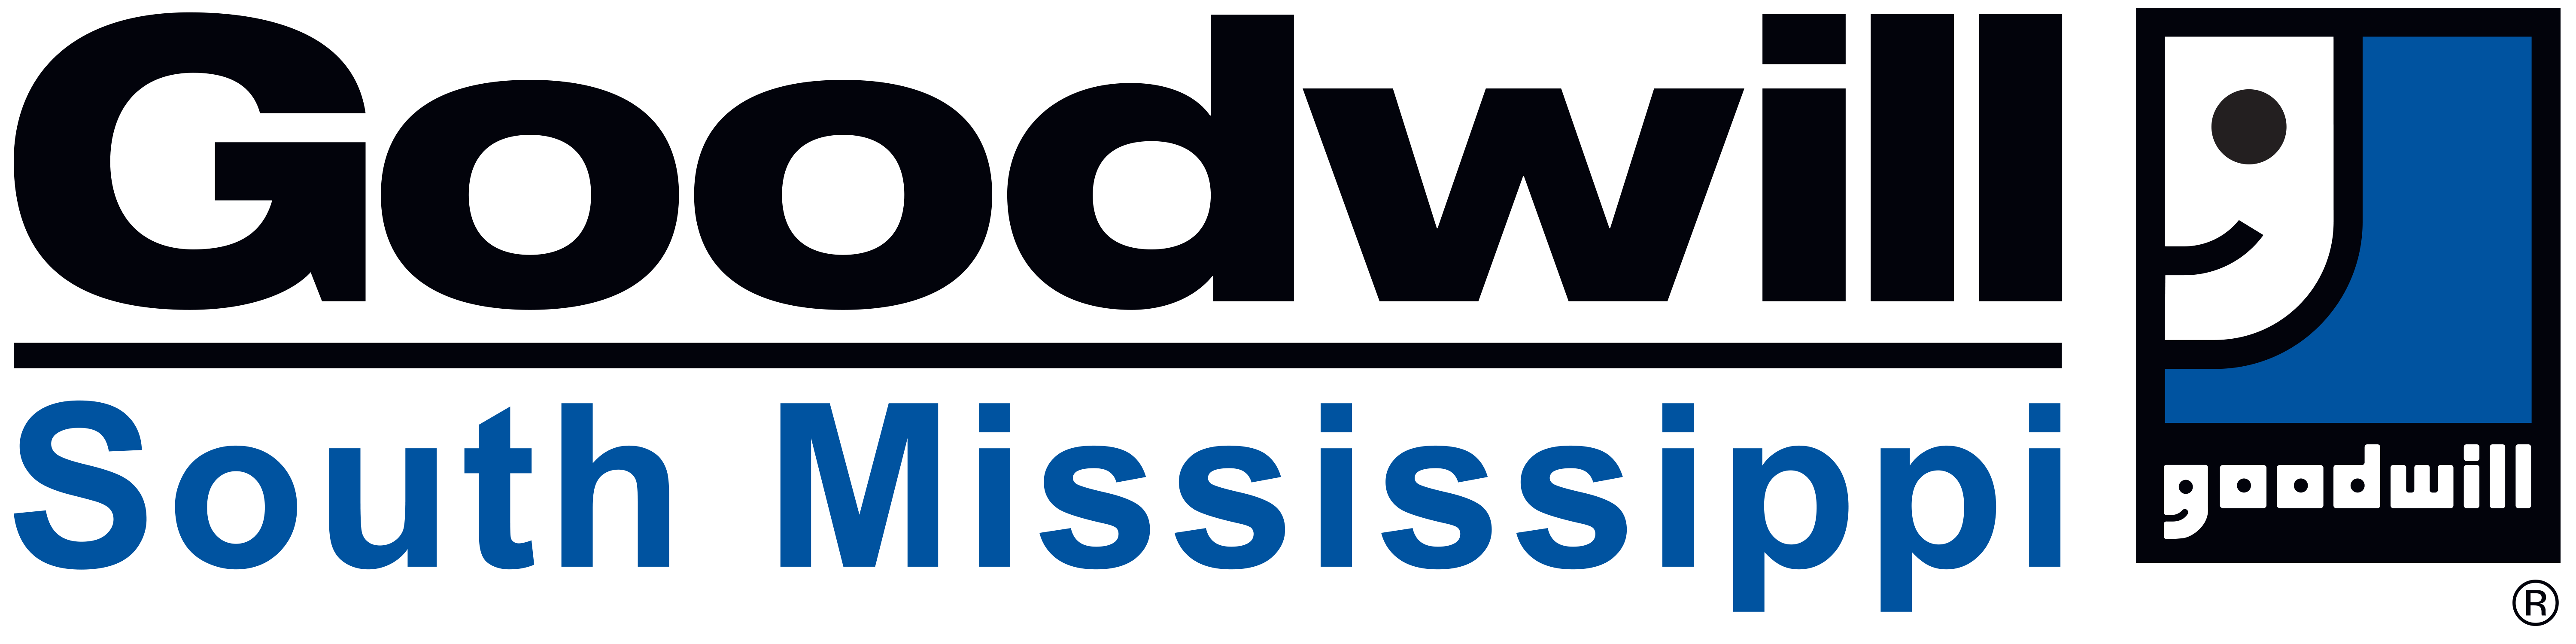 Goodwill Industries of South Mississippi Company Logo